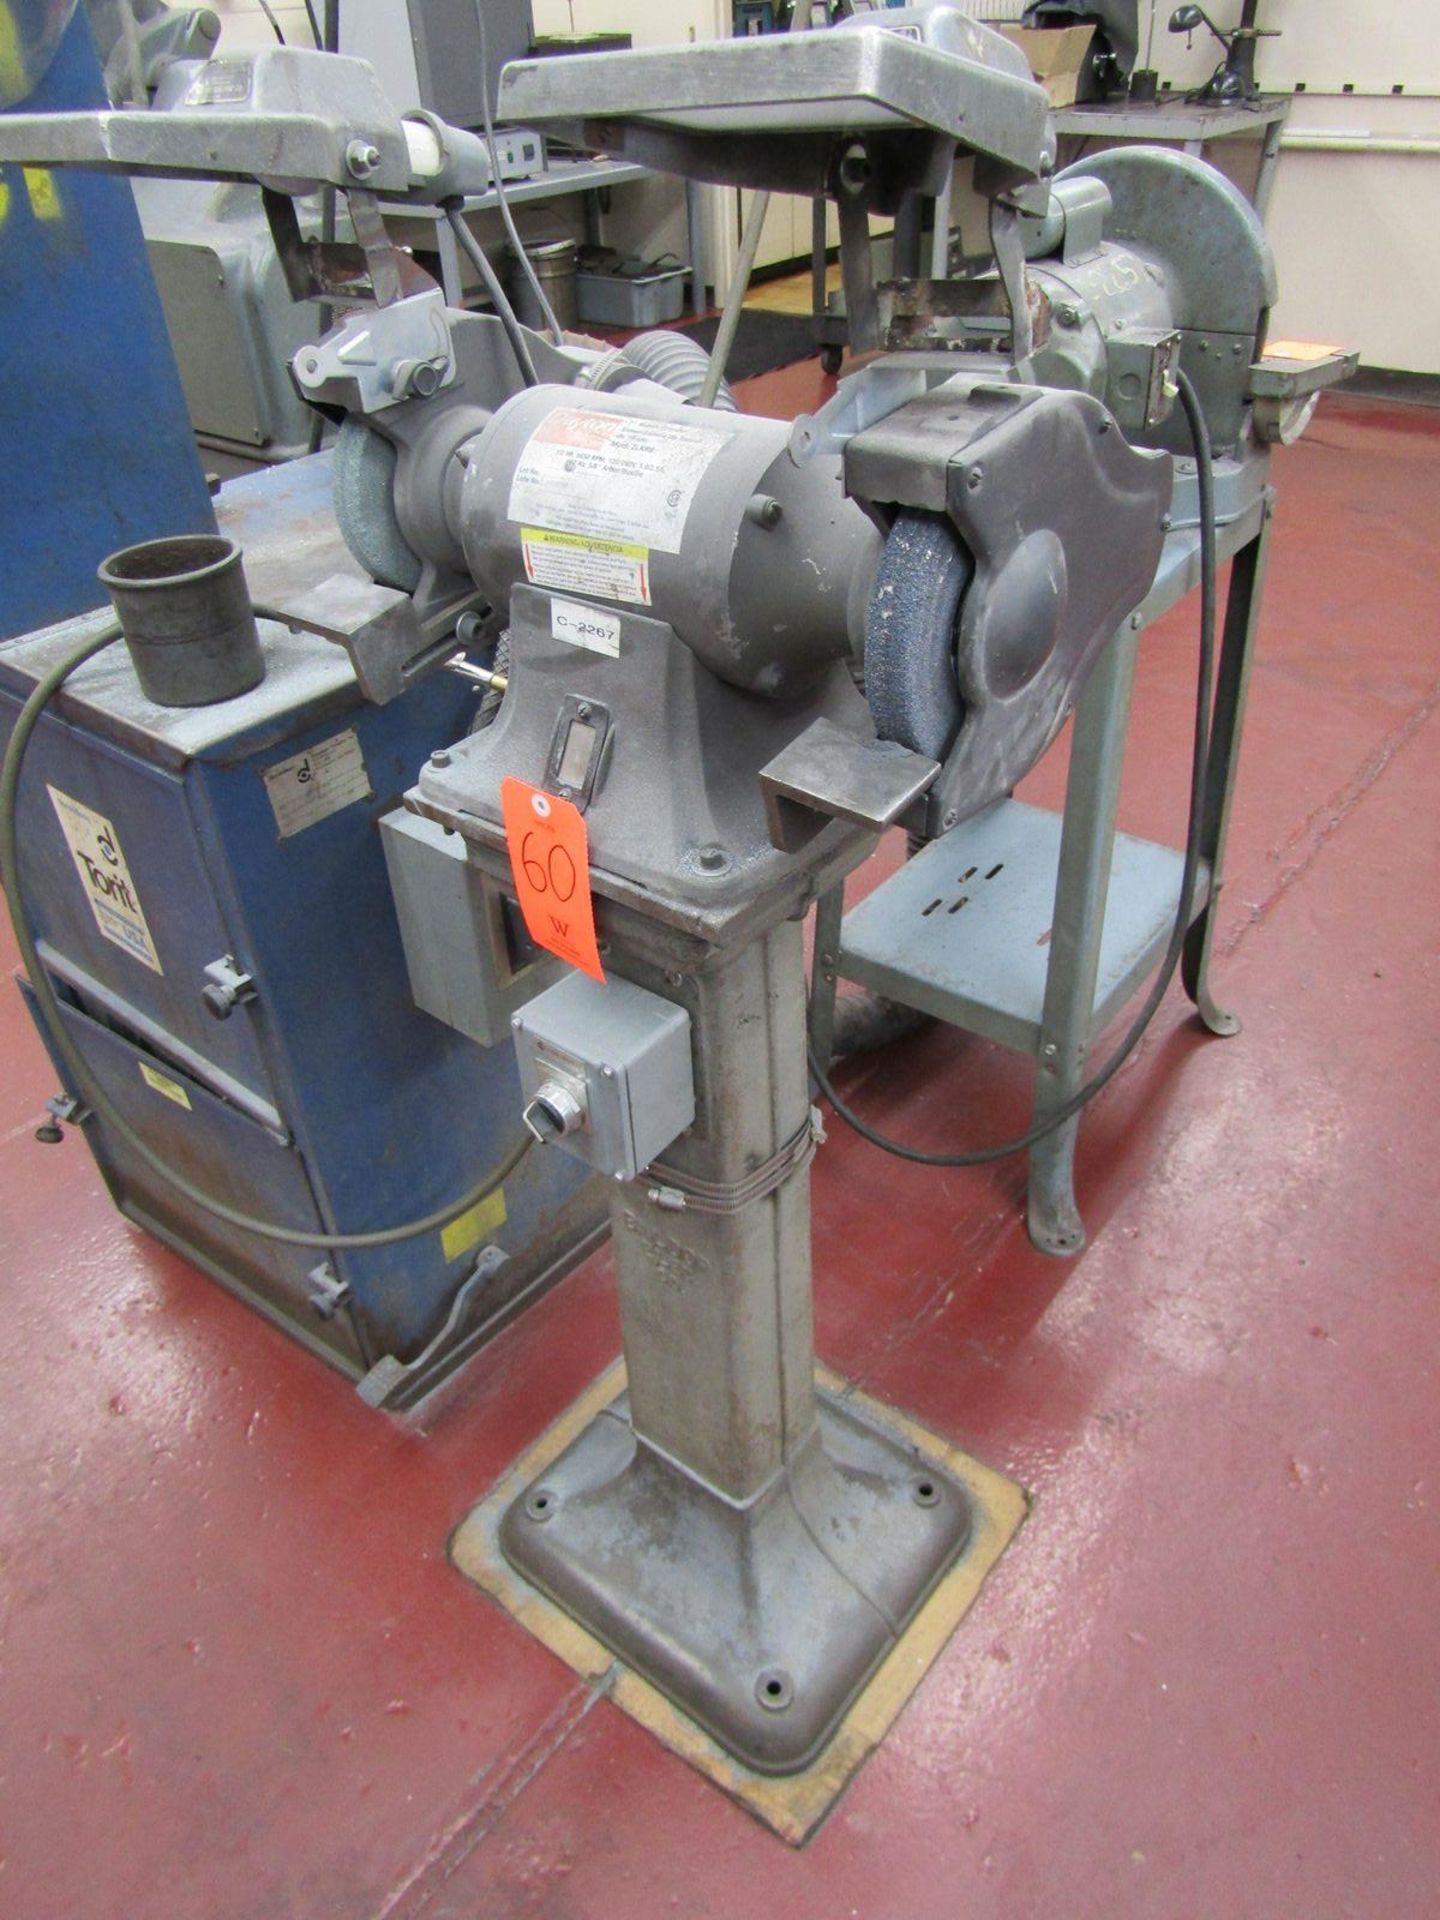 Dayton 7 in. Model 2LKR8 Double End Bench Grinder, S/N: 15100589; with 1/2 HP Motor, Stand (